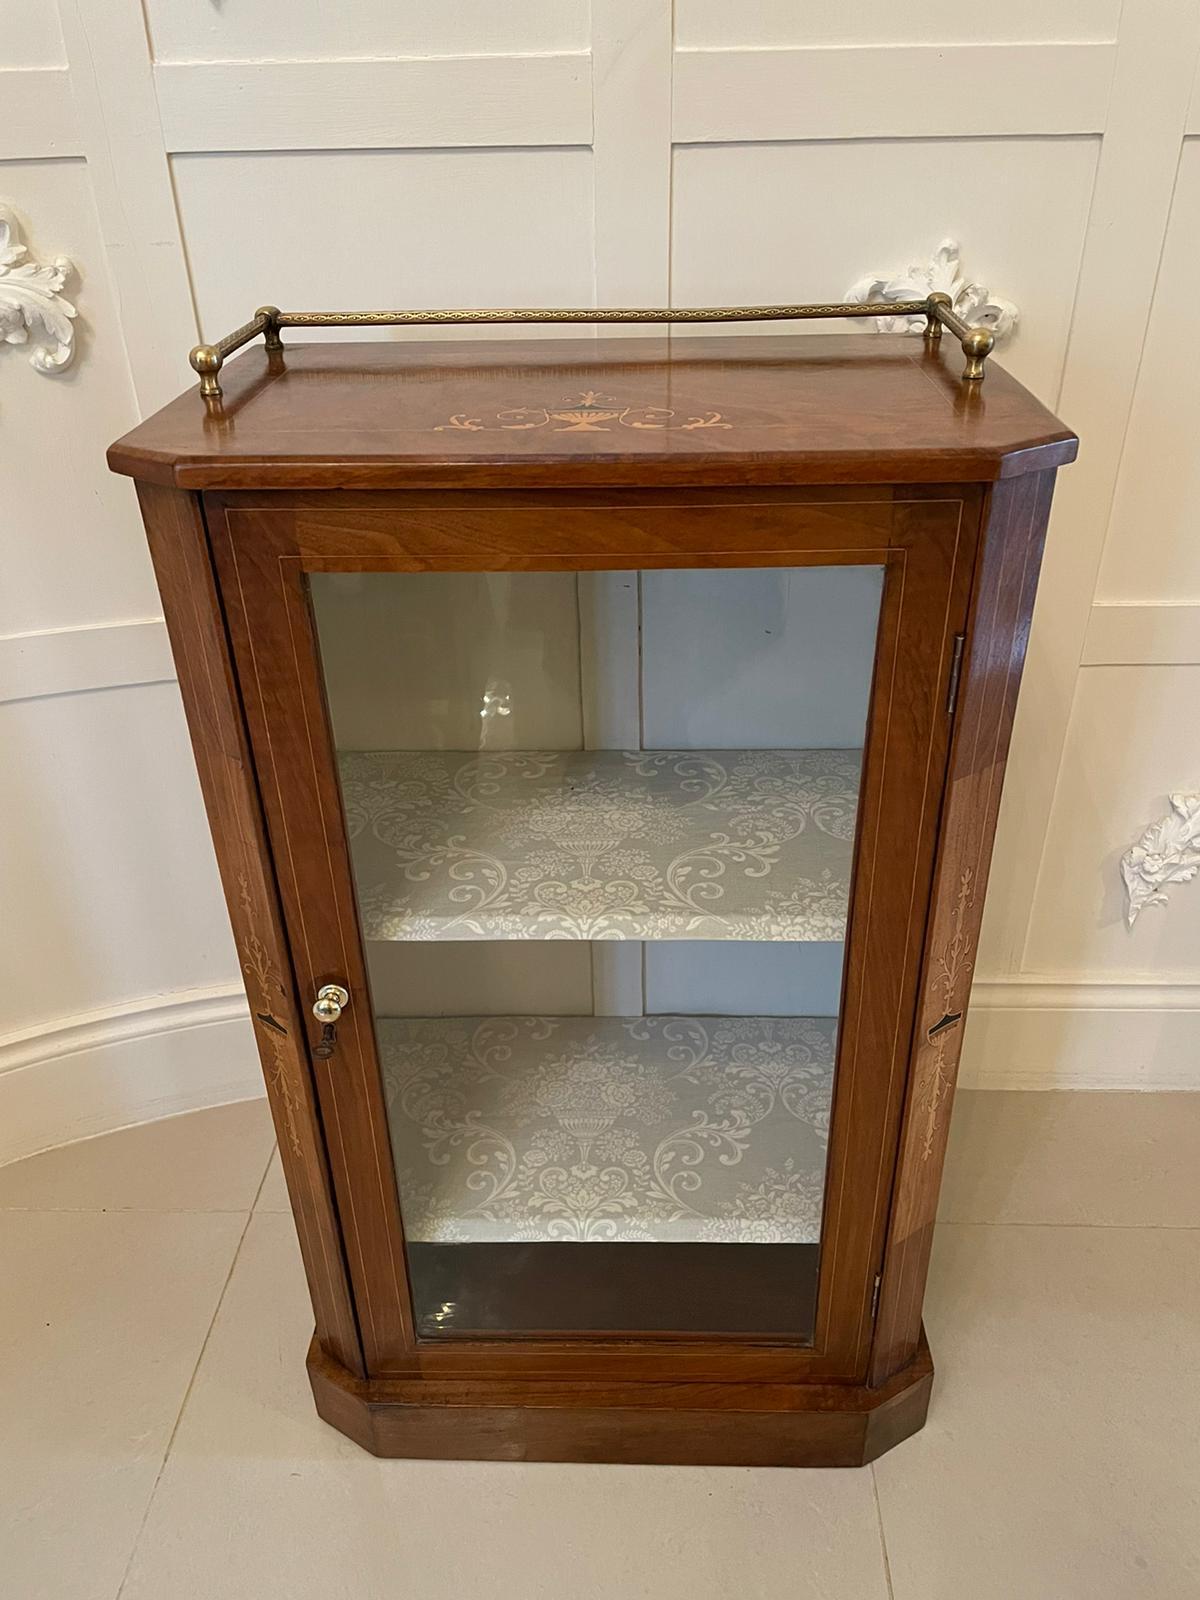 Quality 19th century antique Victorian burr walnut inlaid music cabinet having an appealing original brass gallery, a beautiful quality burr walnut top with urn and stringing boxwood inlay, one glazed door opening to reveal two shelves. It features